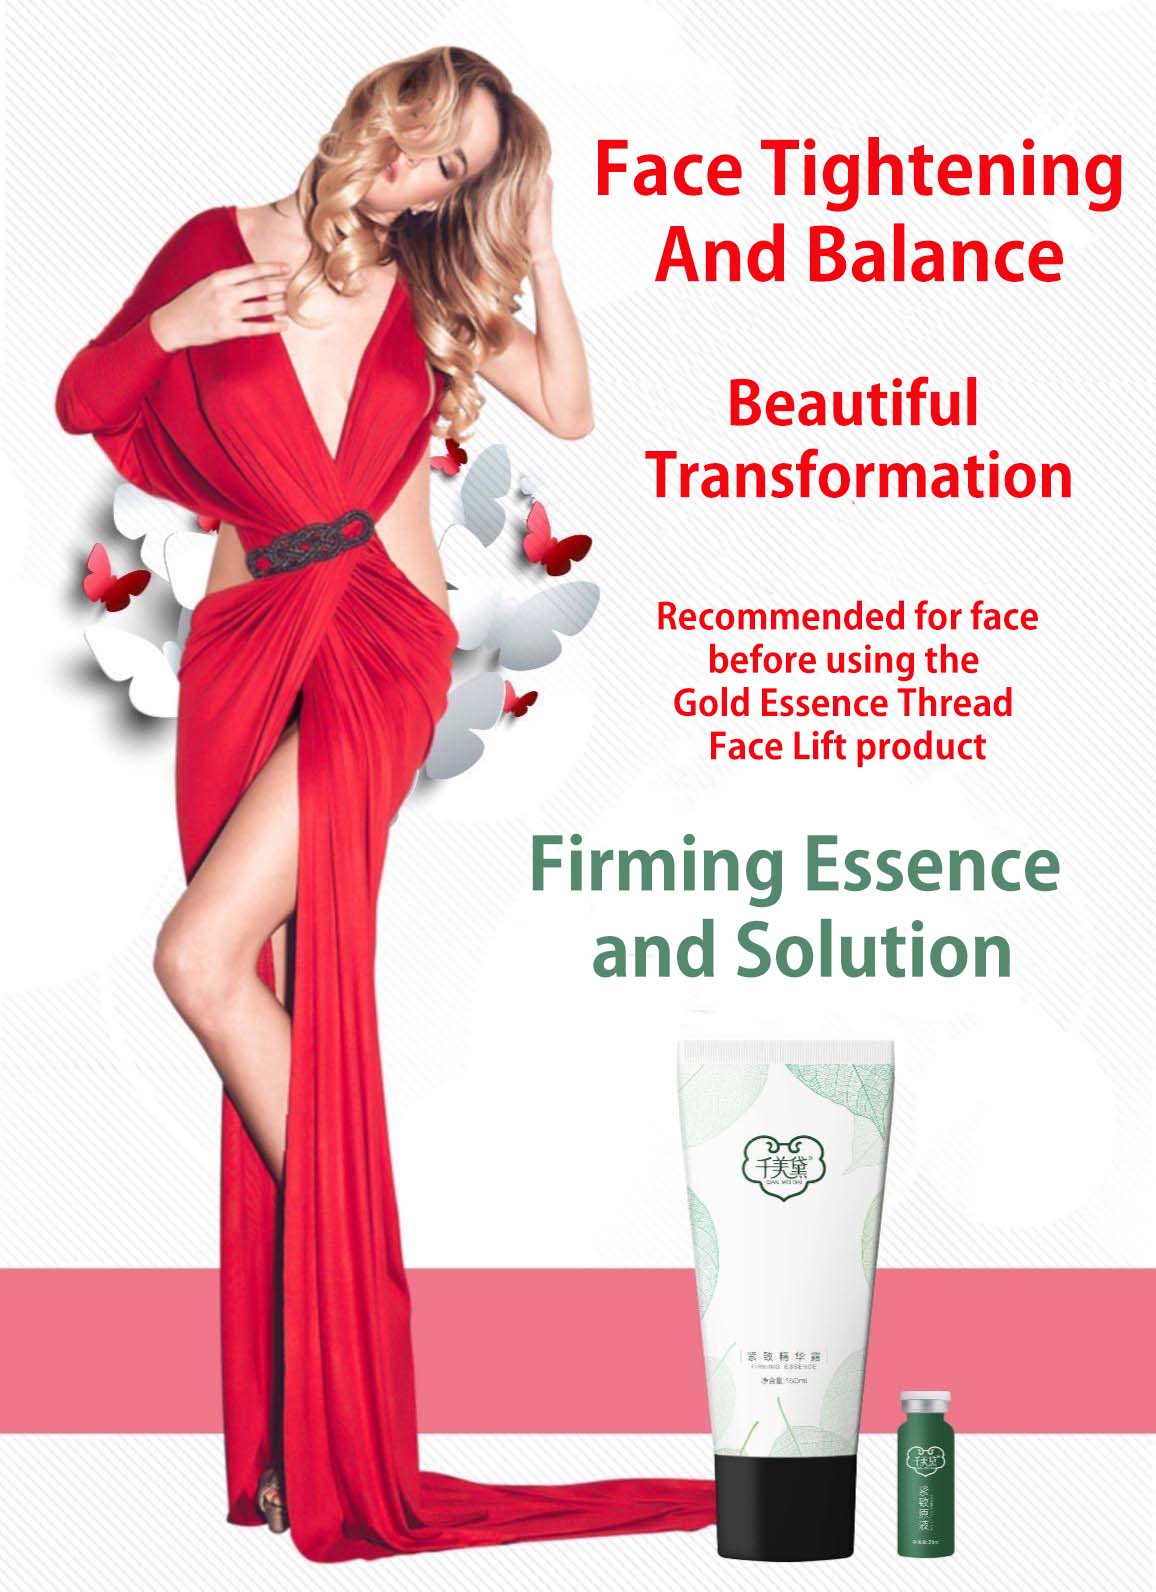 face-firming-essence